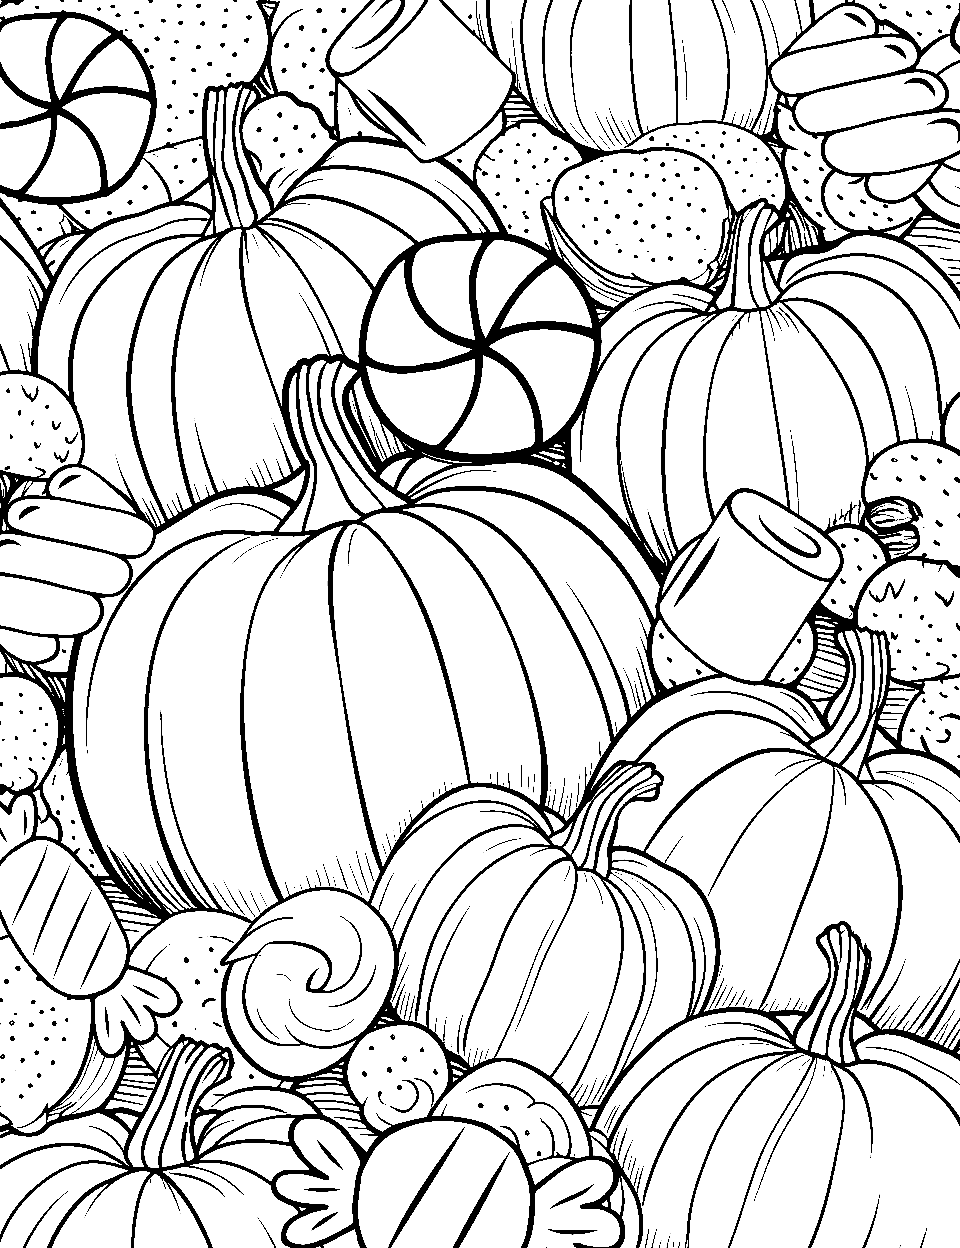 Pumpkin Patch Treats Candy Coloring Page - A pumpkin patch with hidden candies among the pumpkins for kids to find.